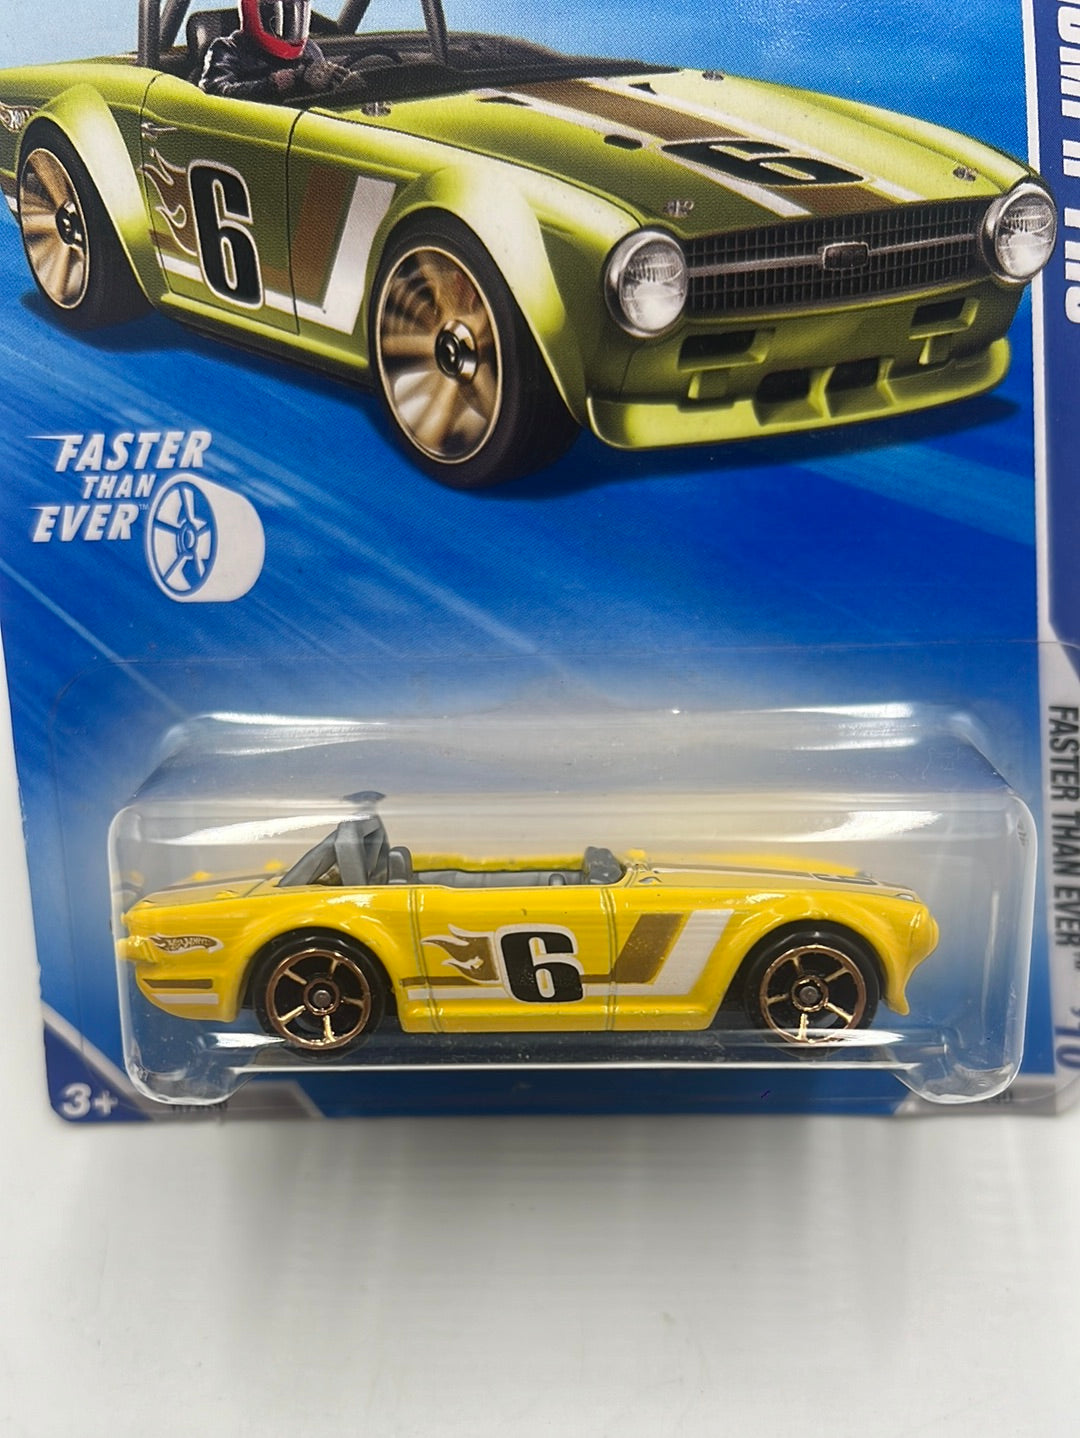 2010 Hot Wheels Faster Than Ever Triumph TR6 Kmart Exclusive Yellow 131/240 236C